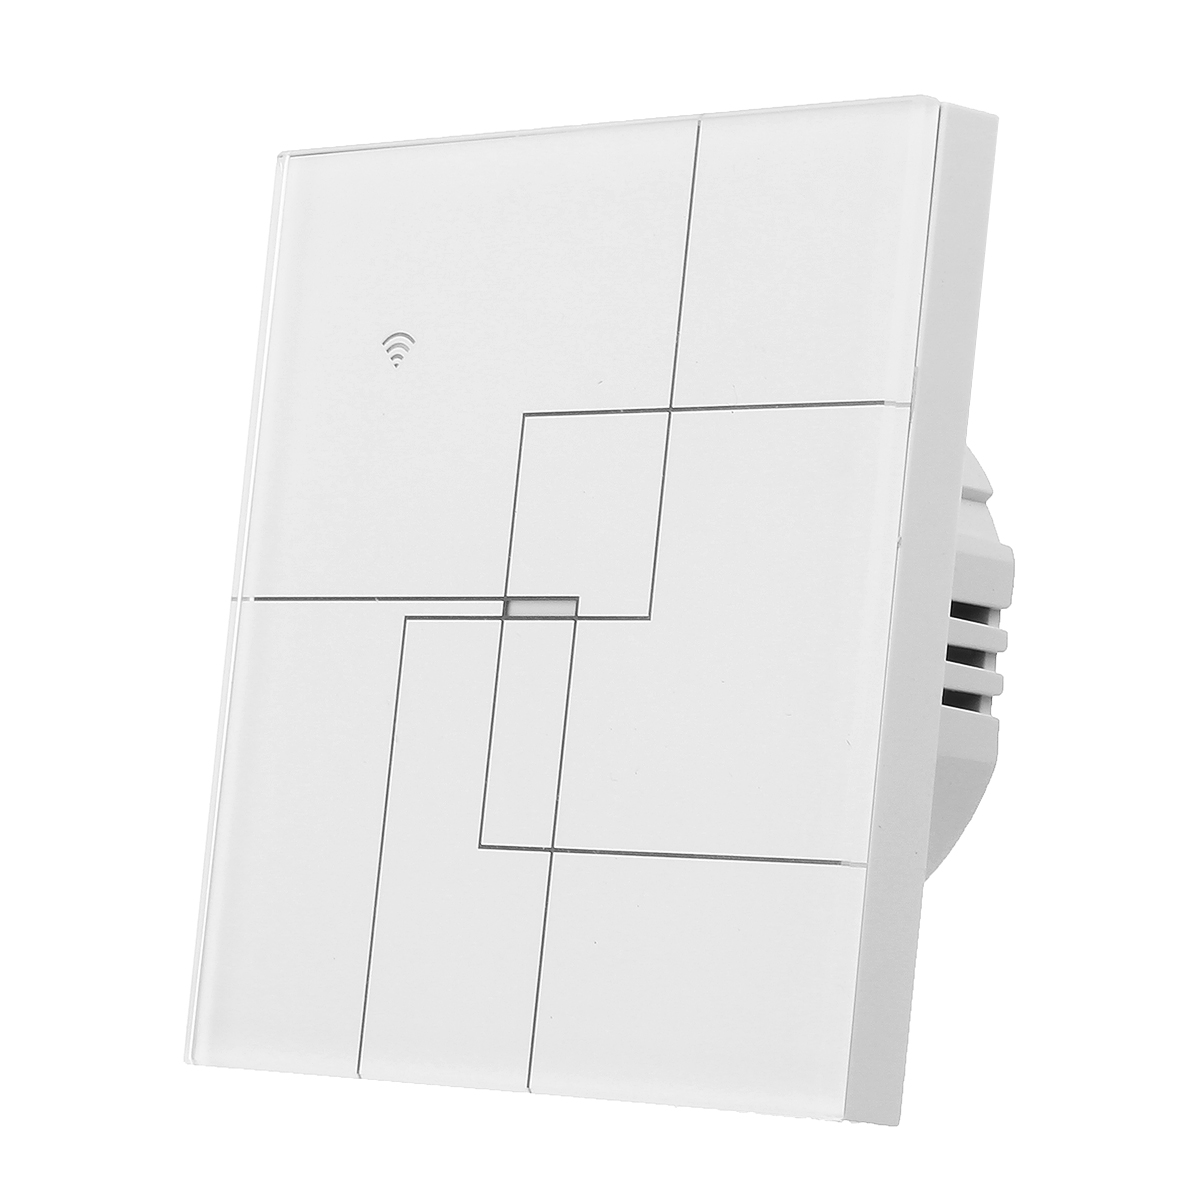 123-Way-AC100-240V-Smart-Wifi-Light-Switch-Wall-Touch-Switch-Panel-Work-with-Alexa-Google-Home-1376031-5